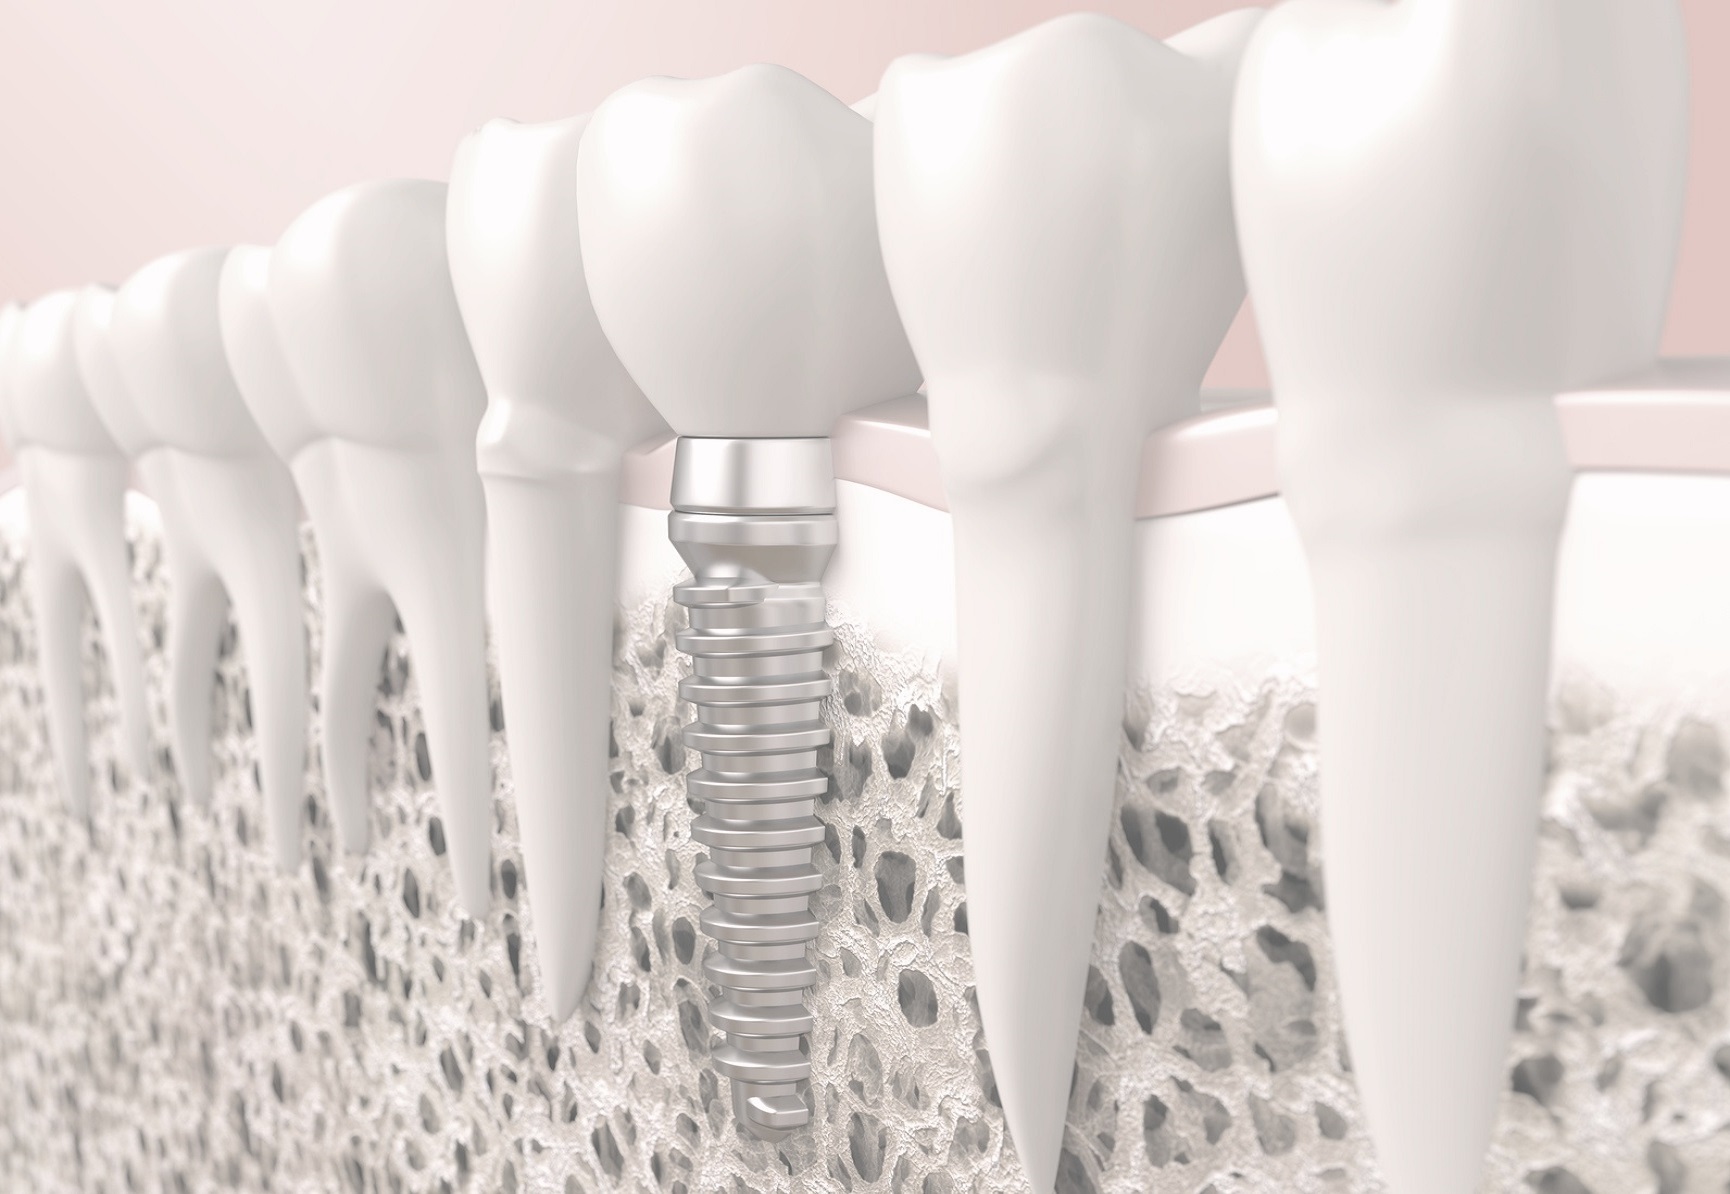 Precise and Painfree Dental Implants at Simply Smiles Dental Clinic, Mumbai